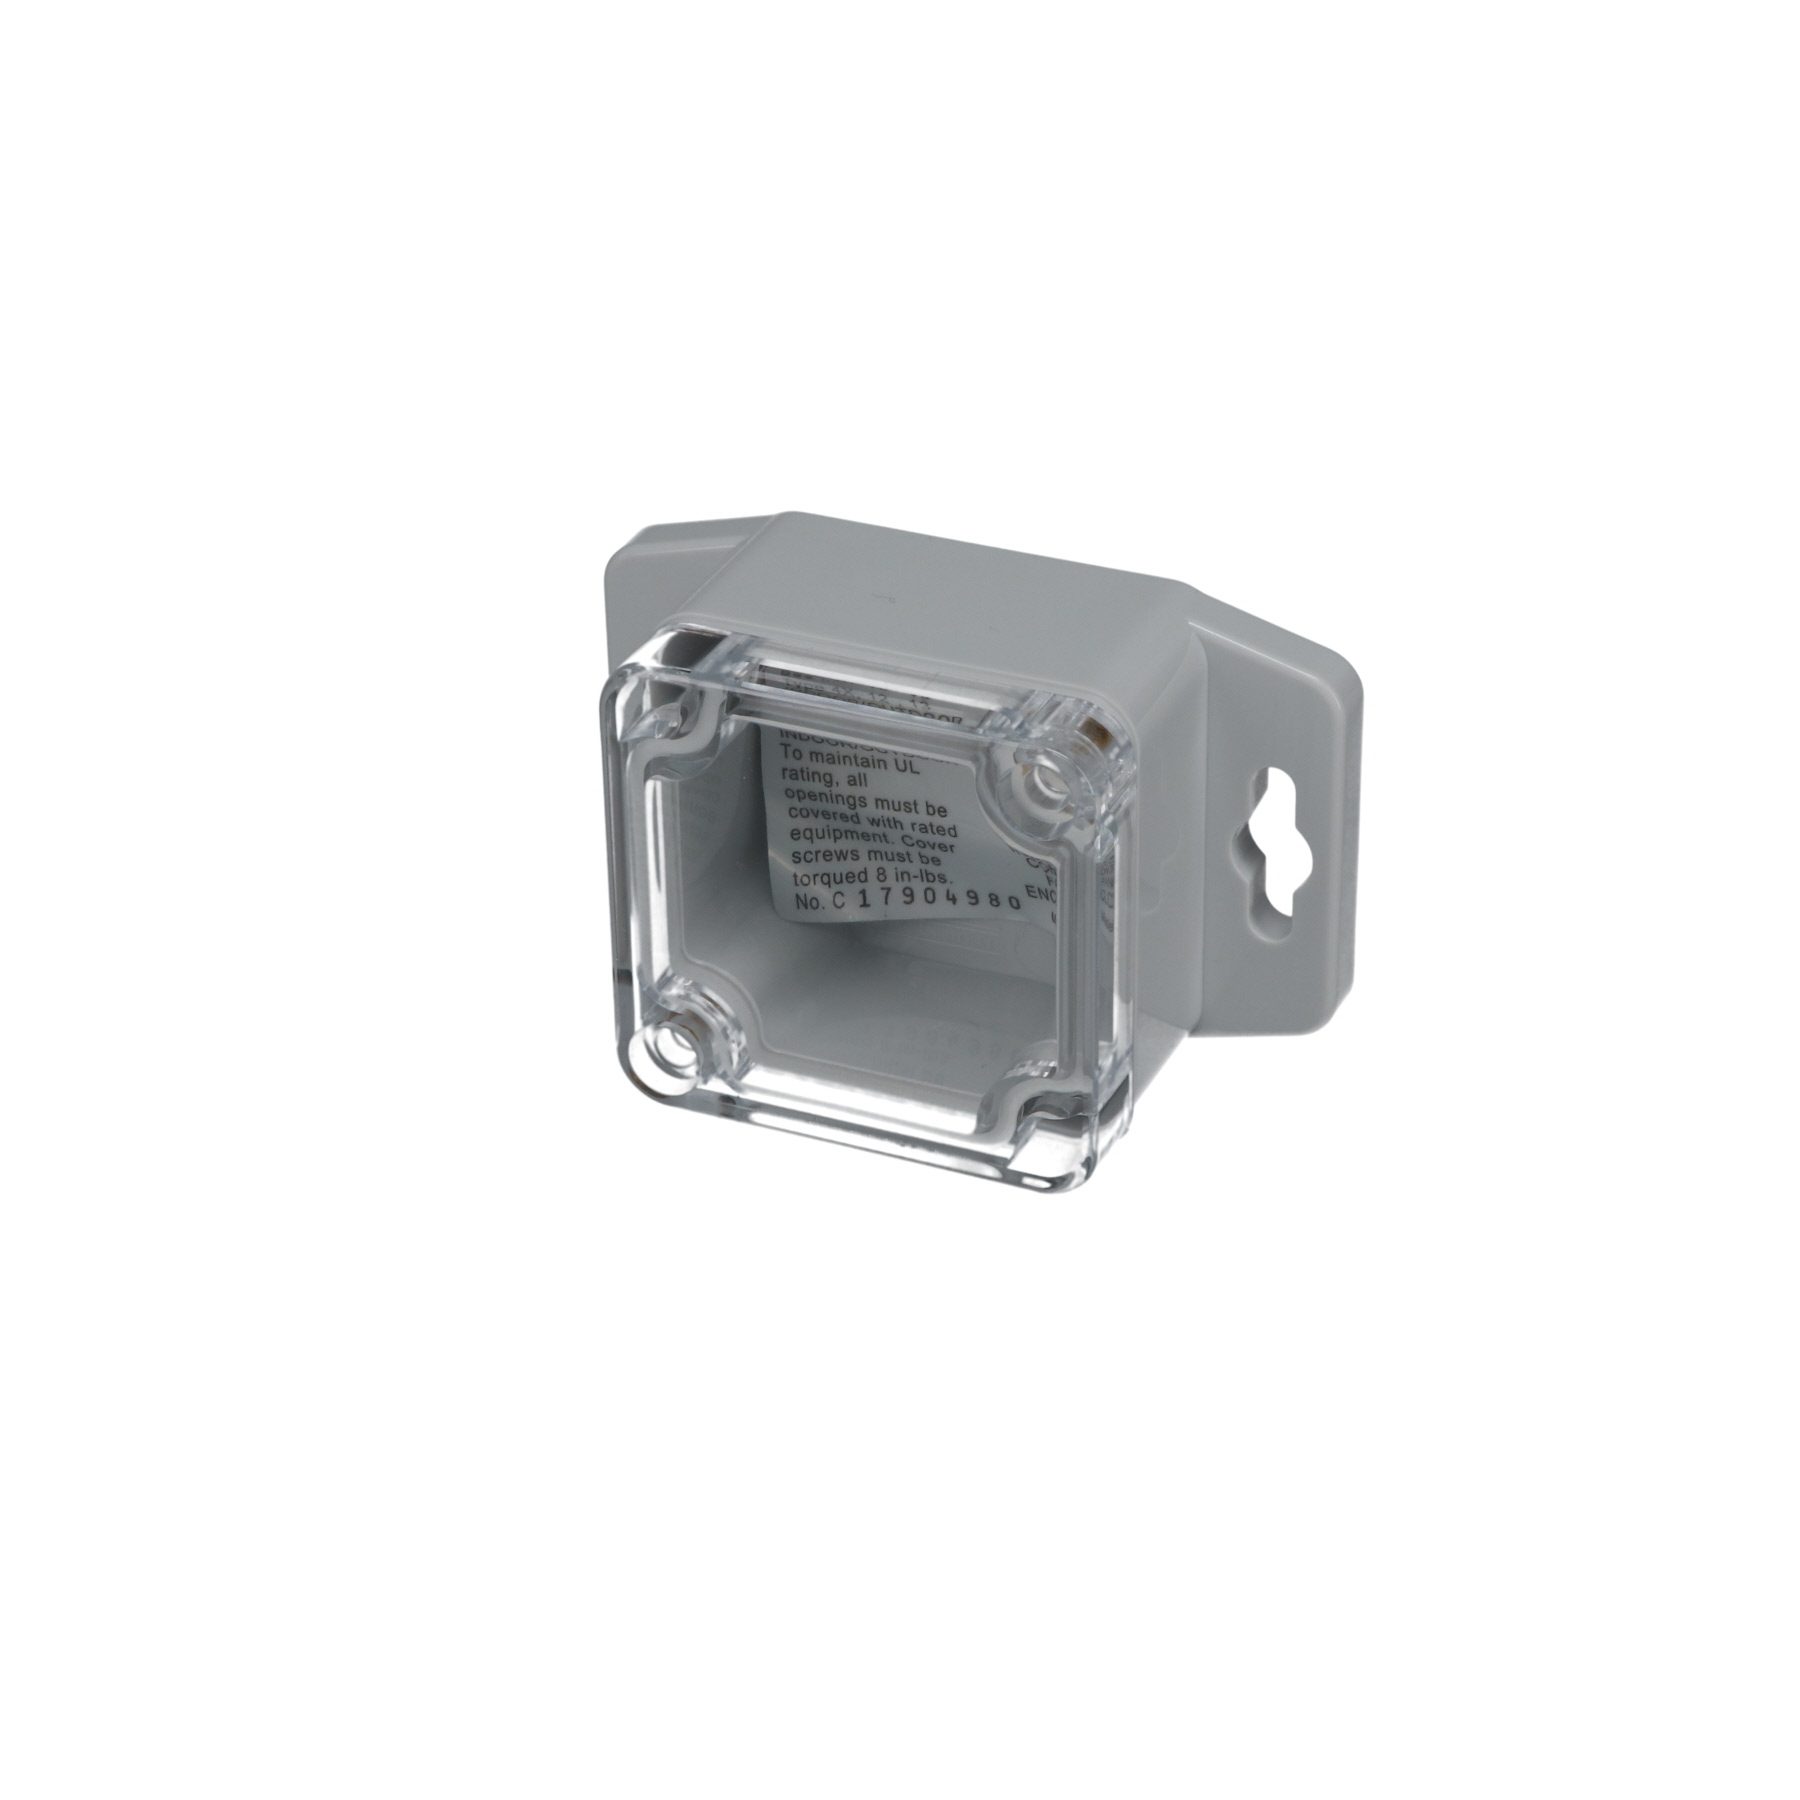 IP65 NEMA 4X Box with Clear Cover and Mounting Brackets PN-1330-CMB